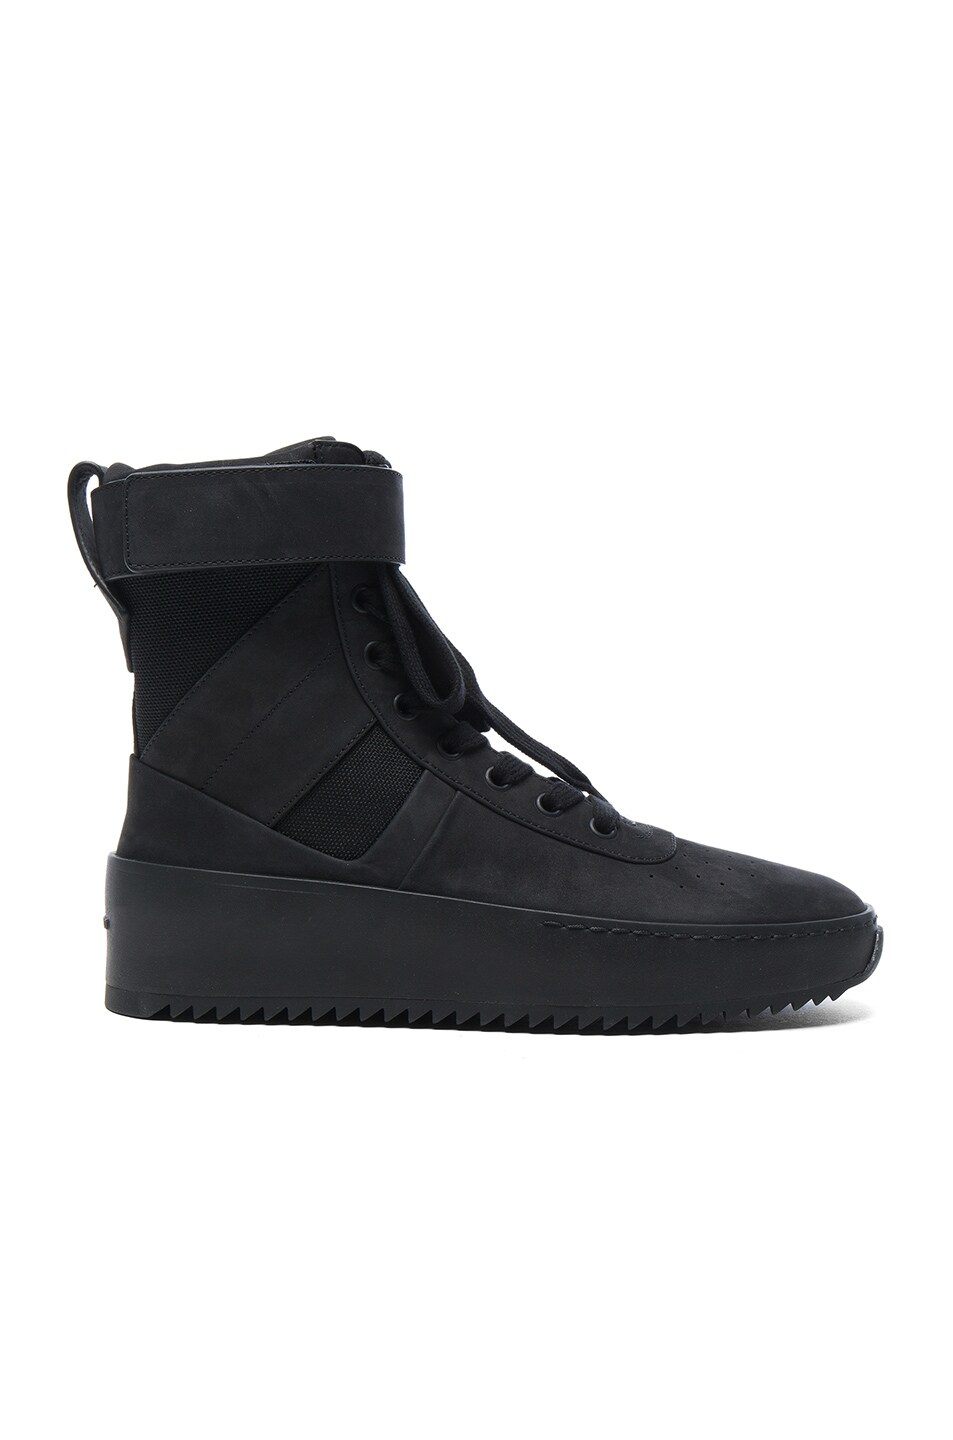 Image 1 of Fear of God Nubuck Leather Military Sneakers in Black